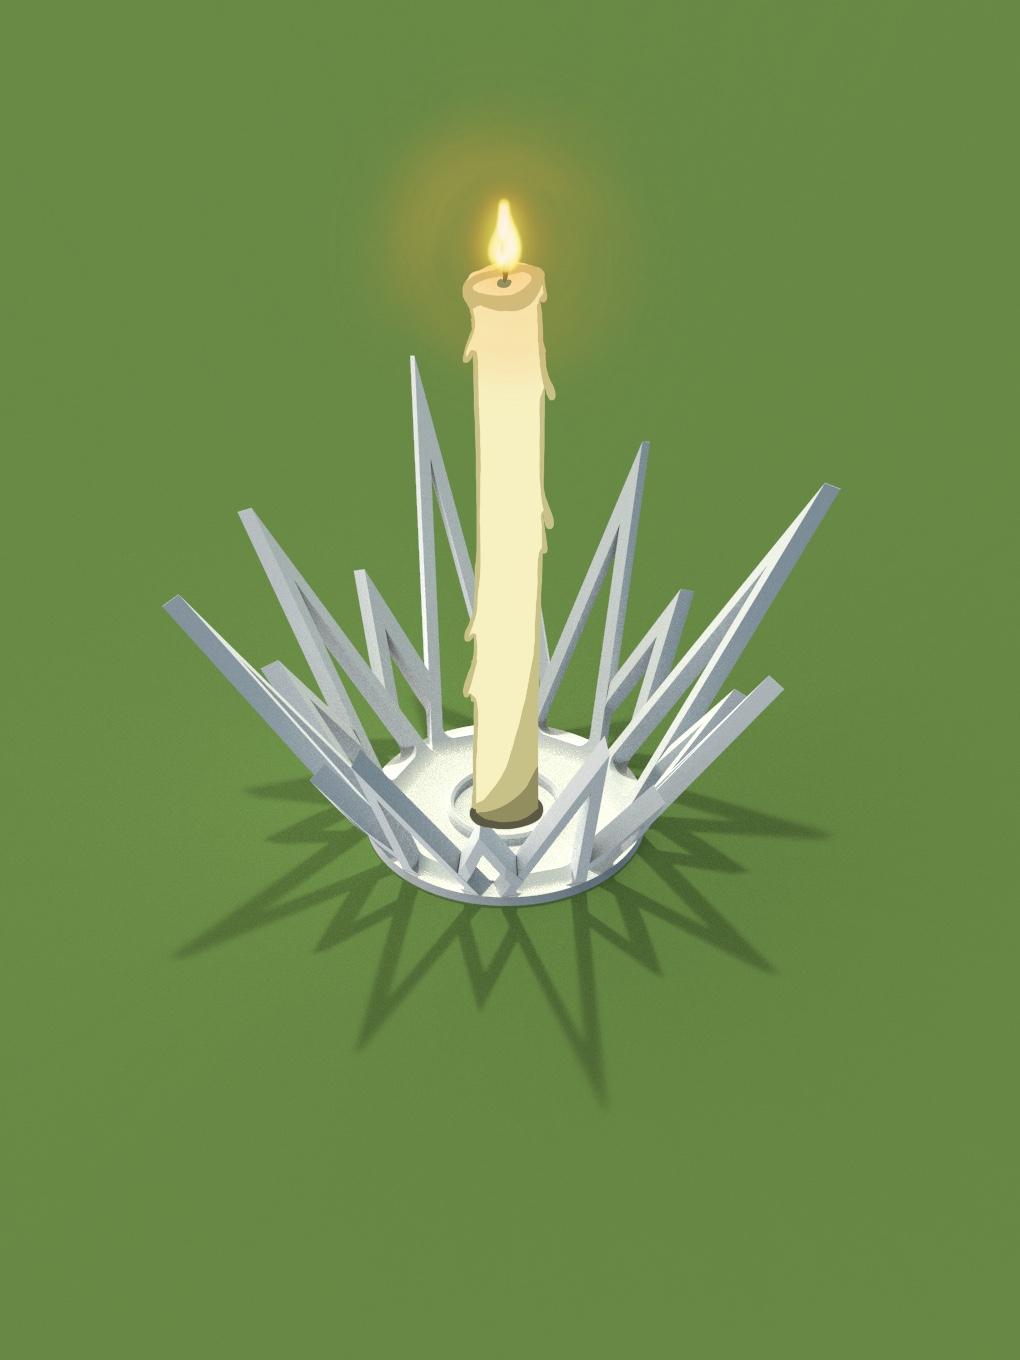 Starry Candle 3d model